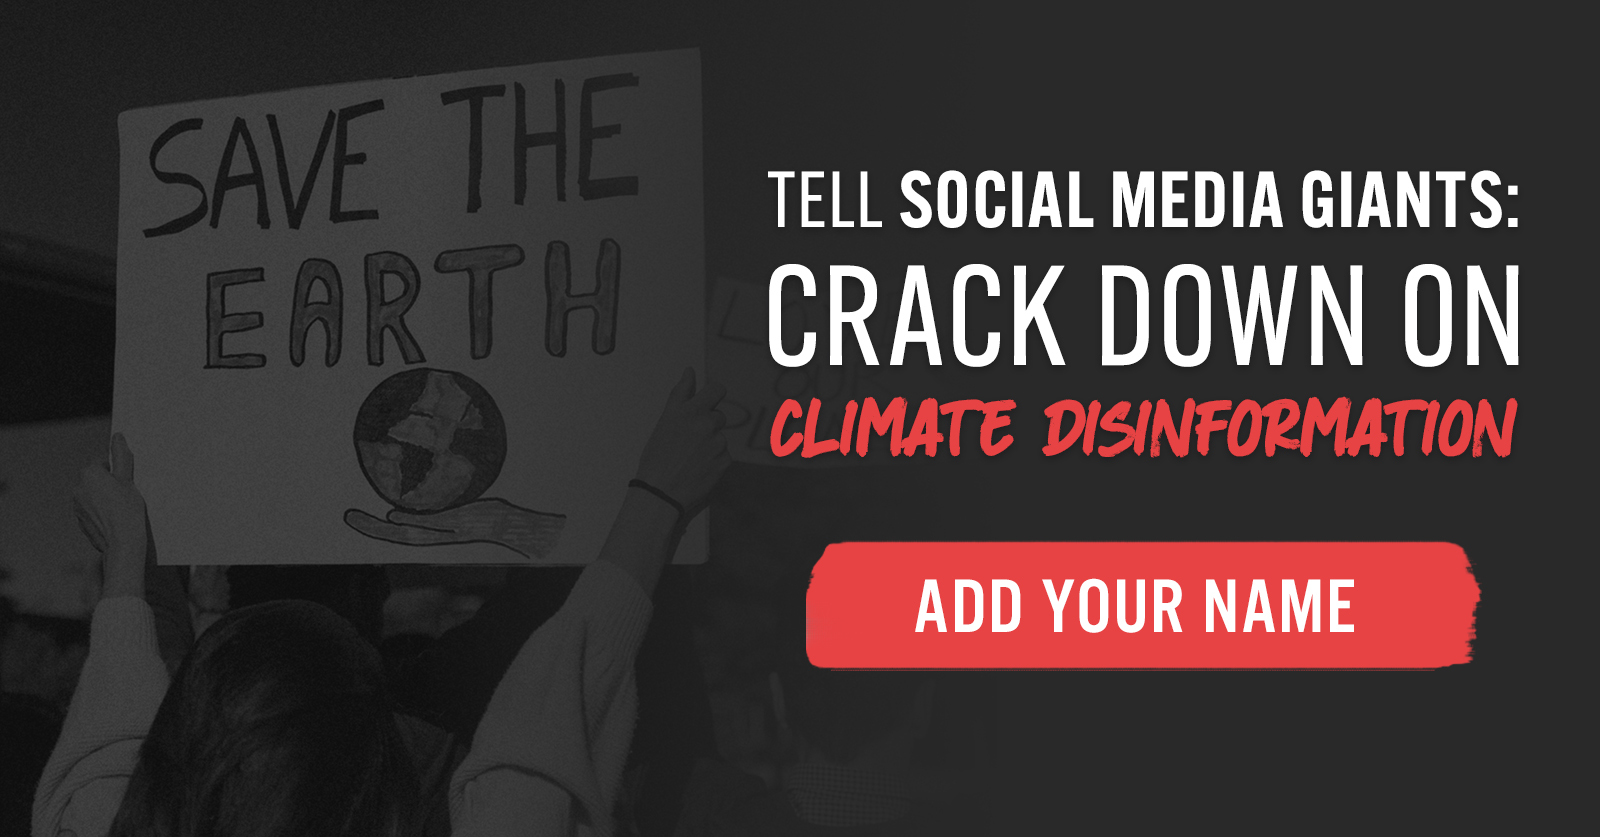 Tell Social Media Giants to Crack Down on Climate Disinformation